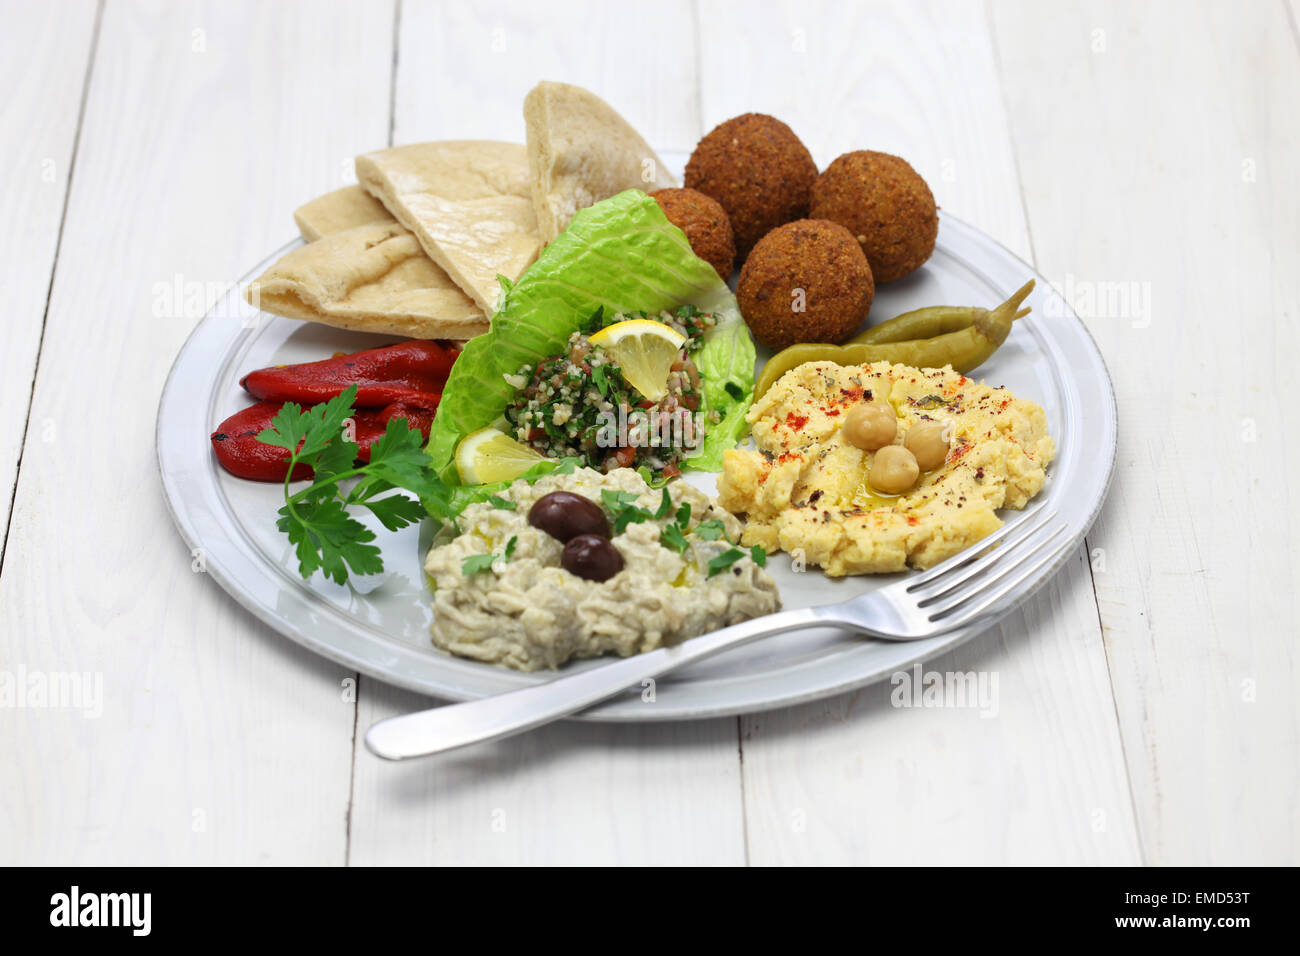 hummus, falafel, baba ghanoush, tabbouleh and pita, middle eastern cuisine Stock Photo